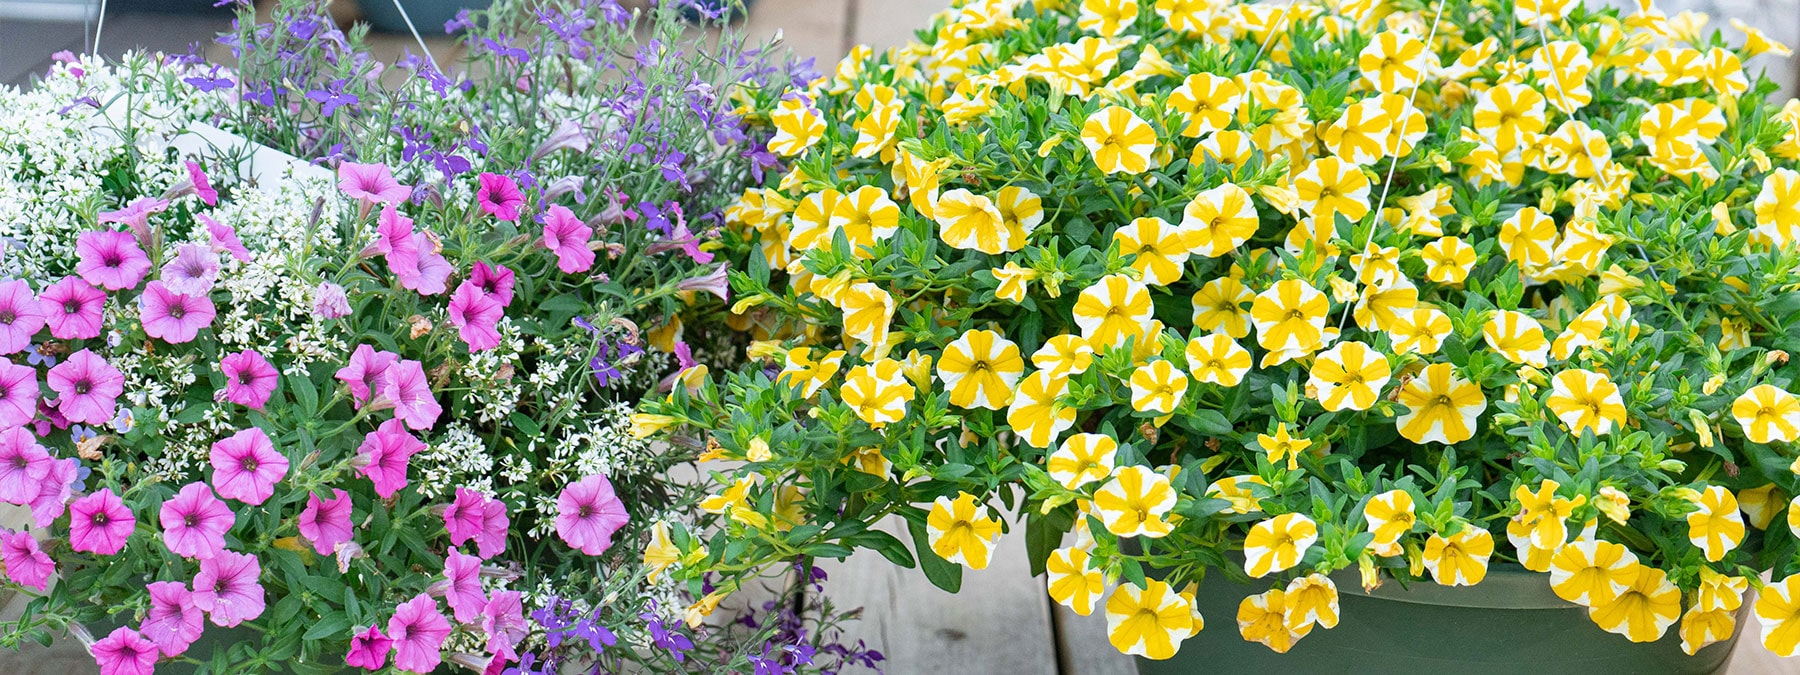 A close up of yellow flowers in a pot